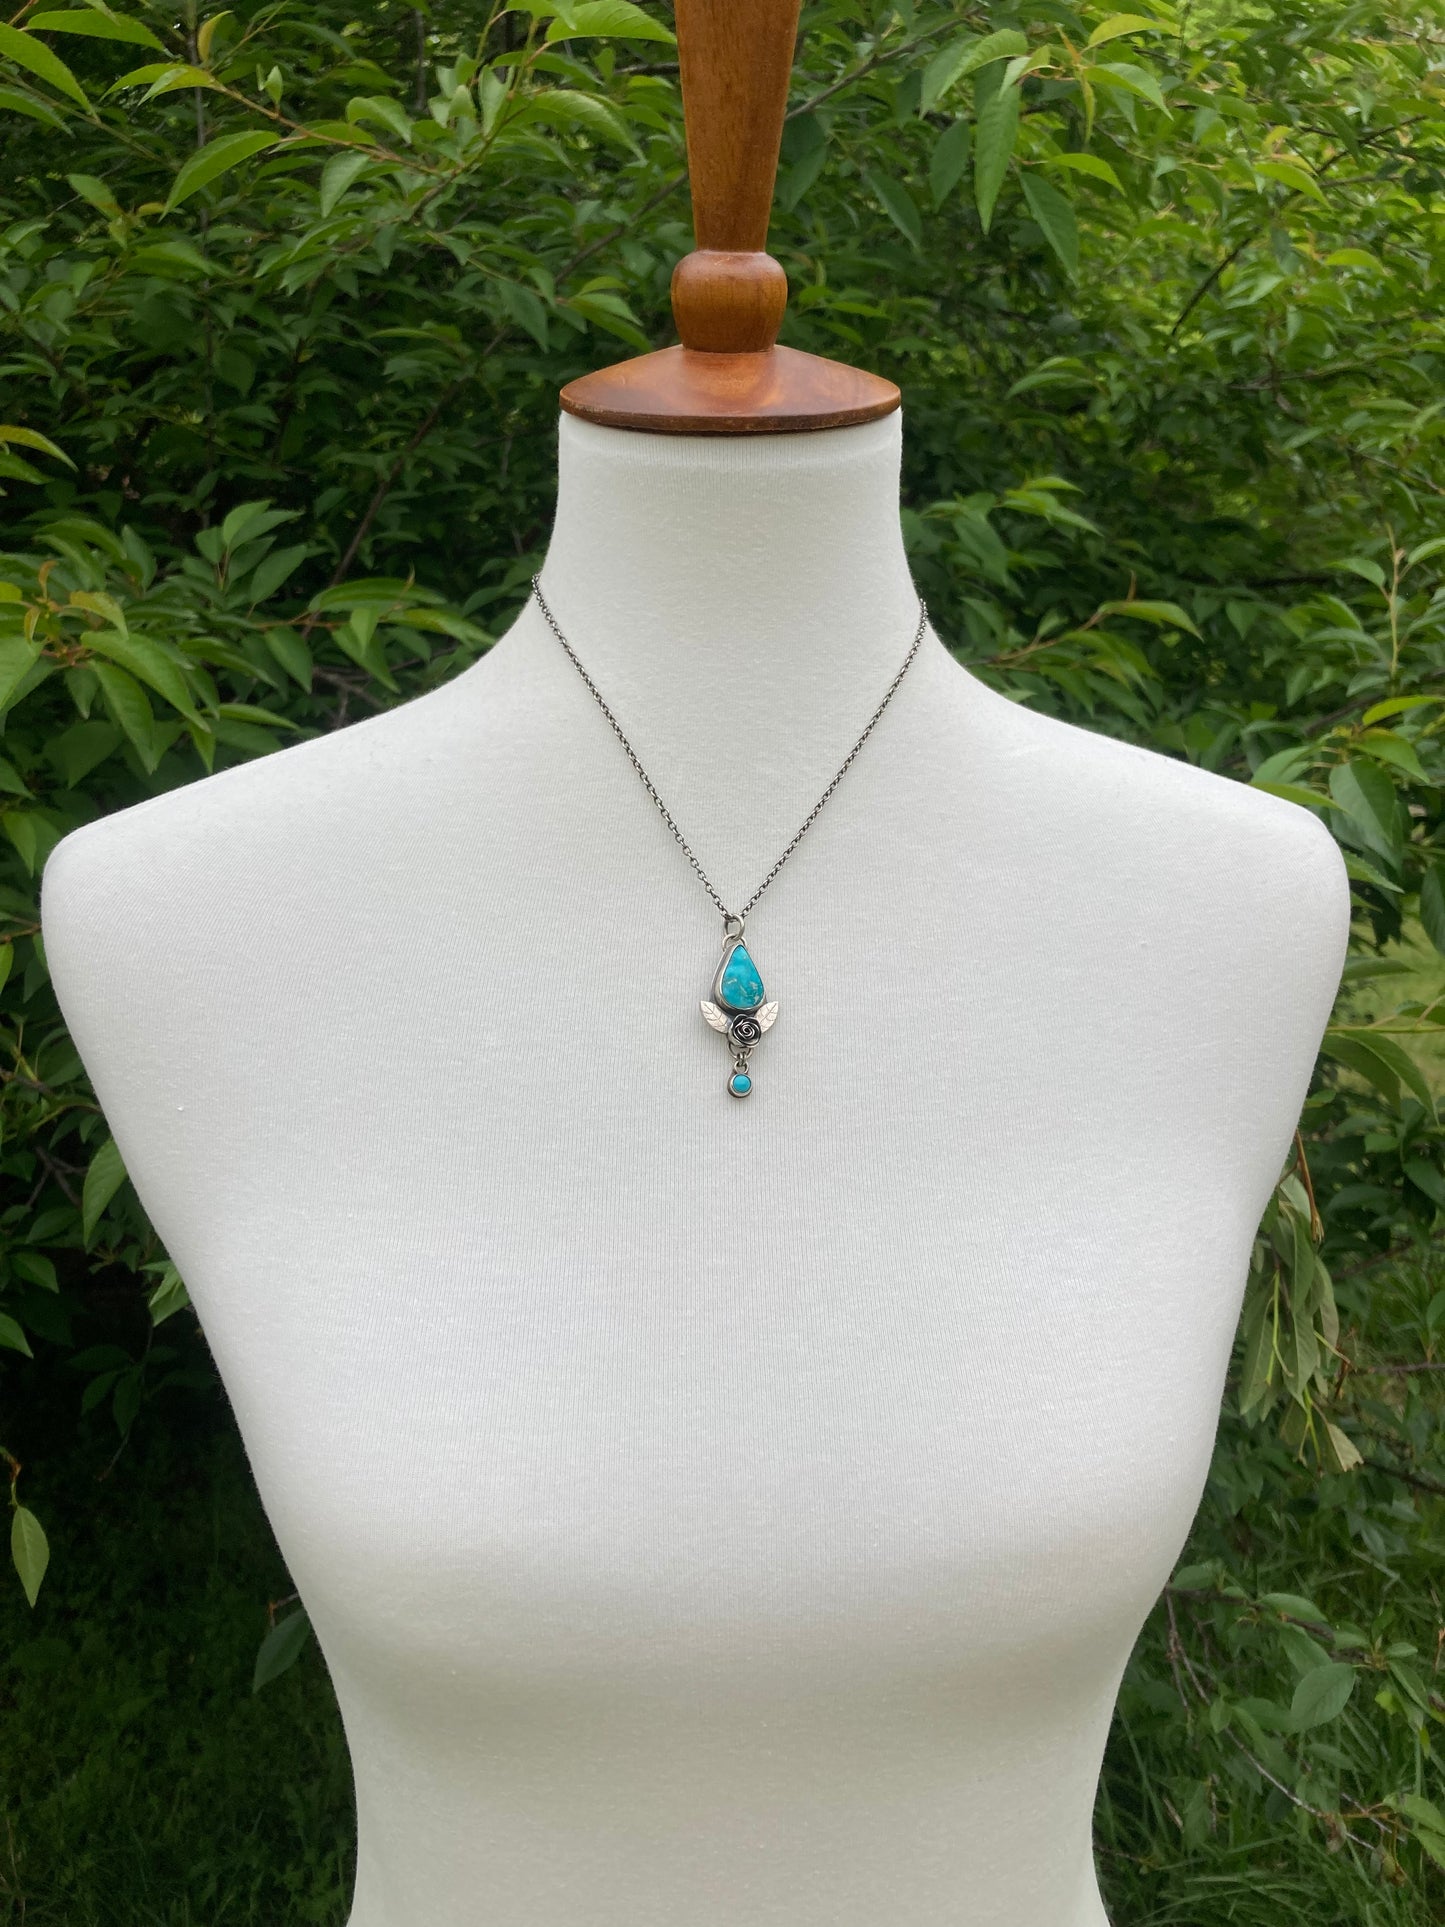 Turquoise Rose Pendant with White Water and Carico Lake Turquoise in Sterling Silver